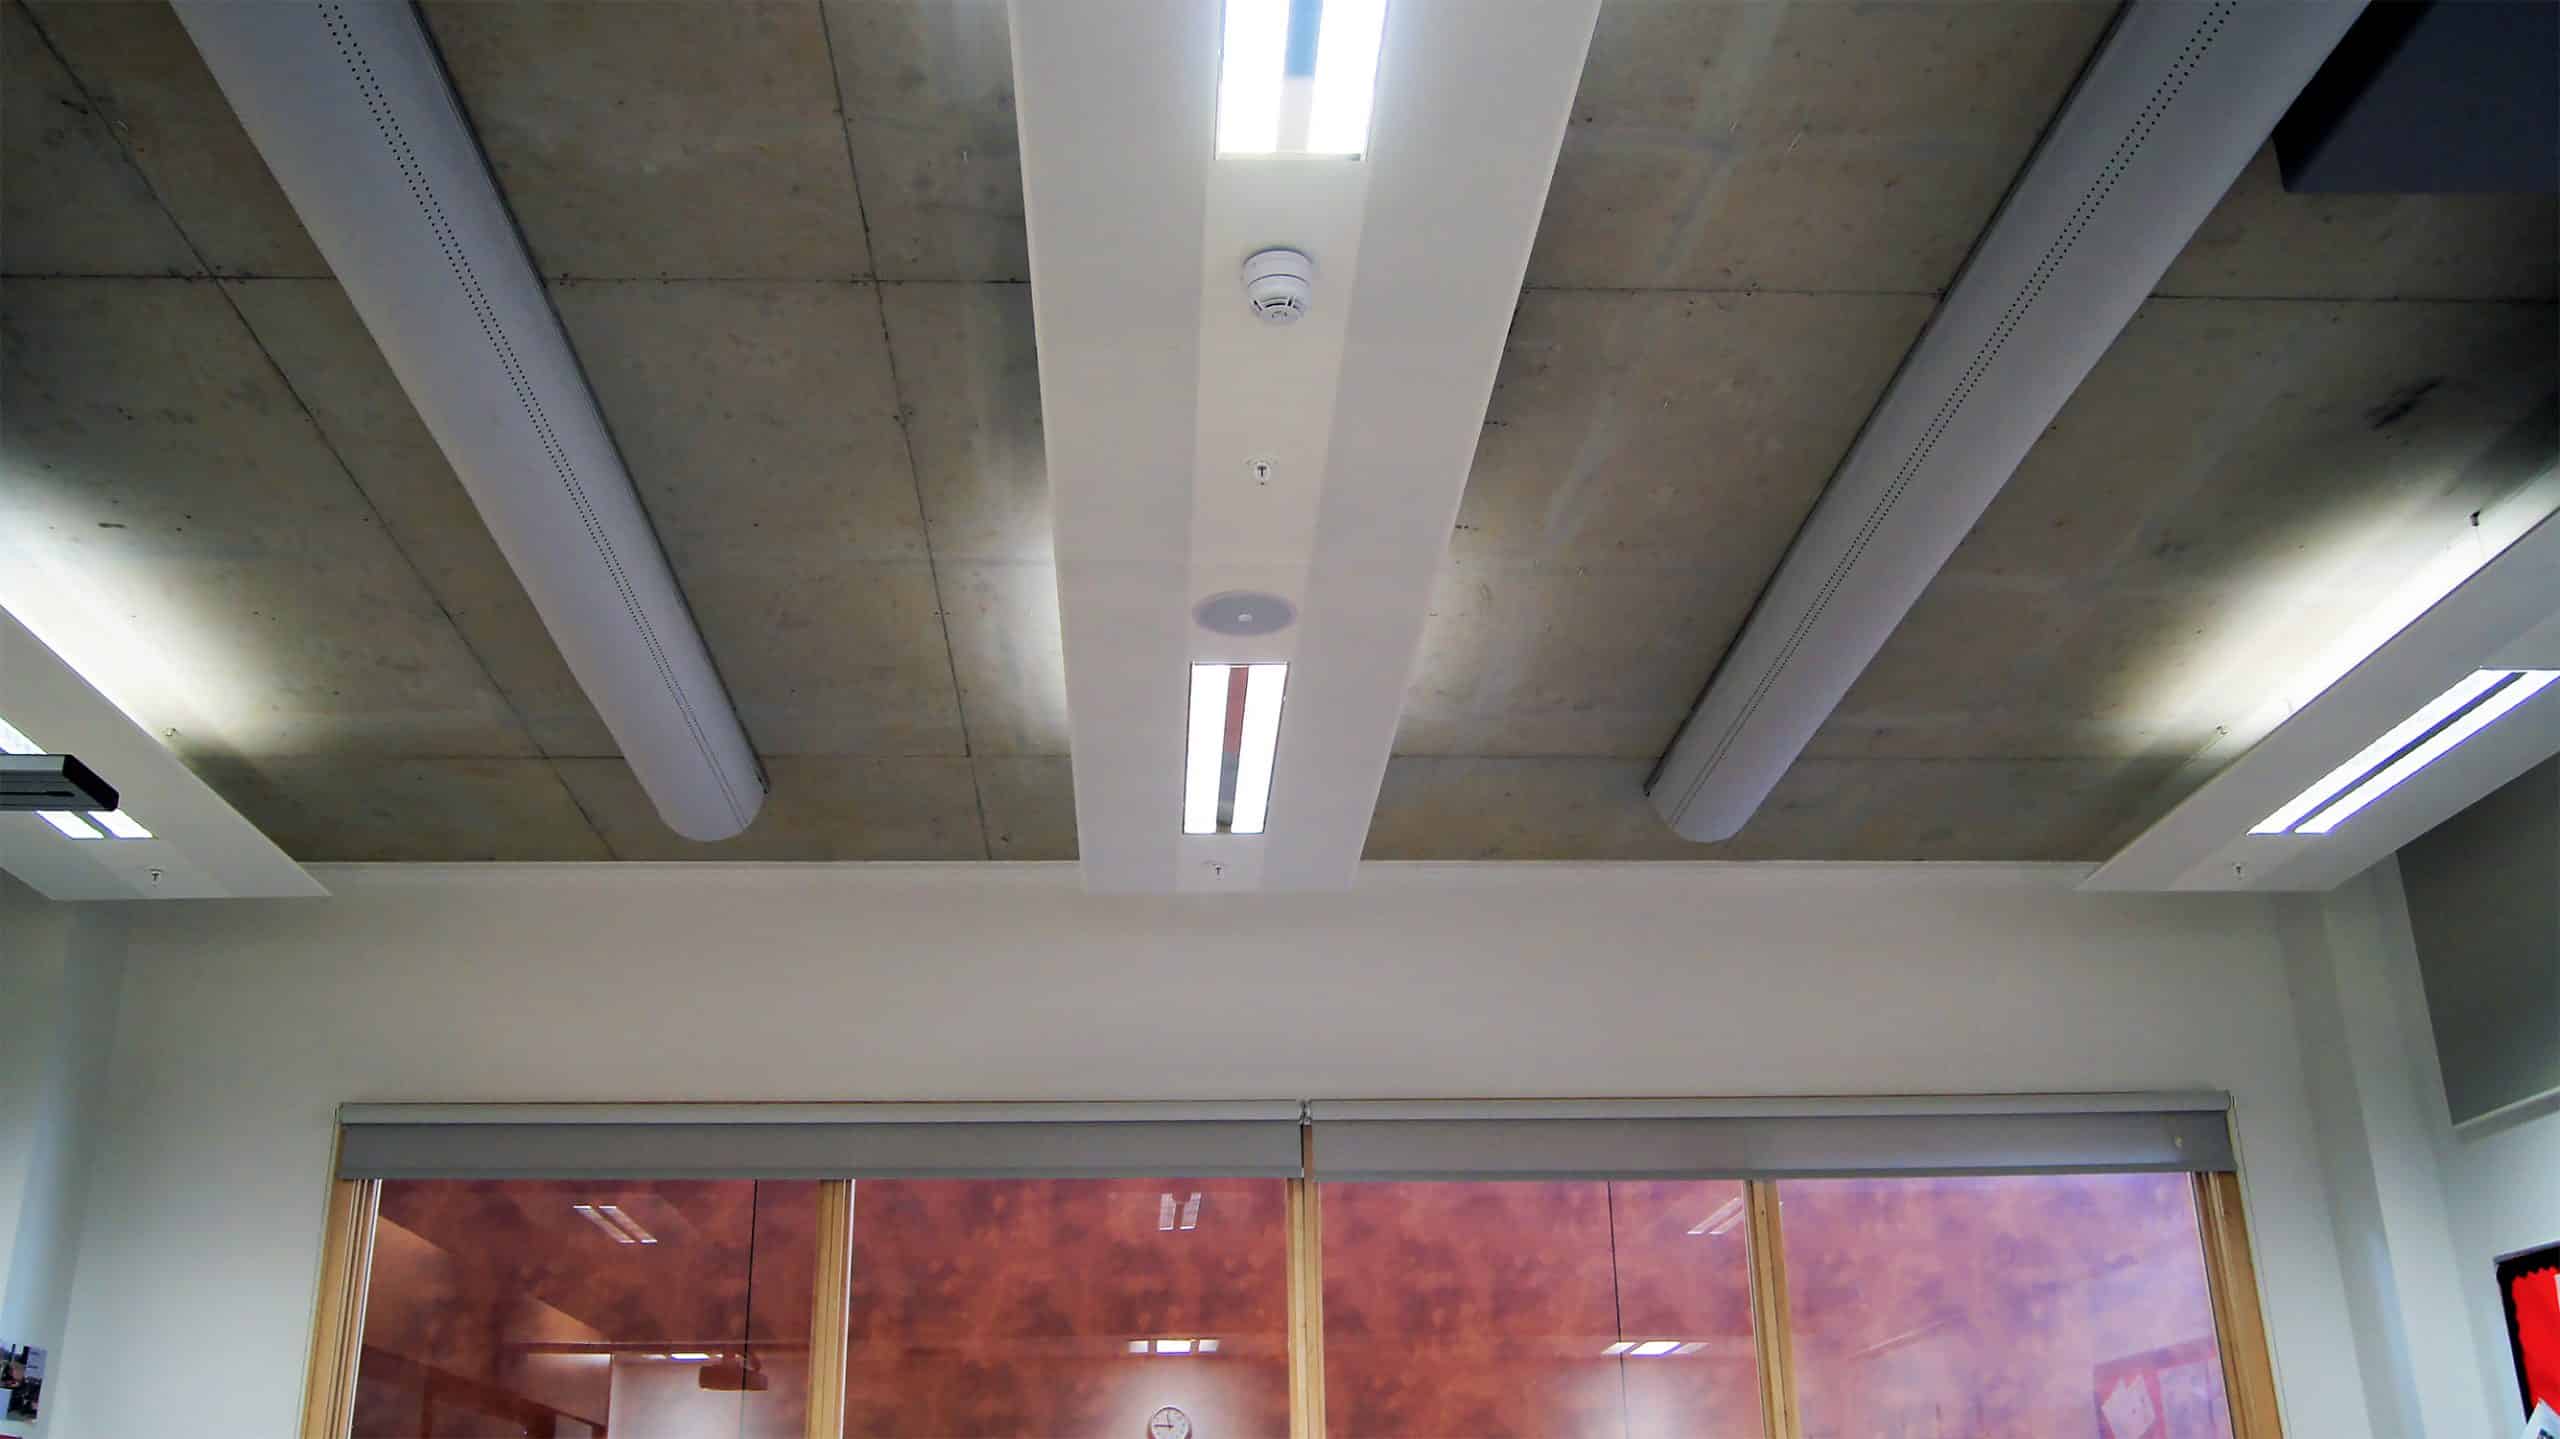 Half round fabric ducts installed on exposed concrete ceiling